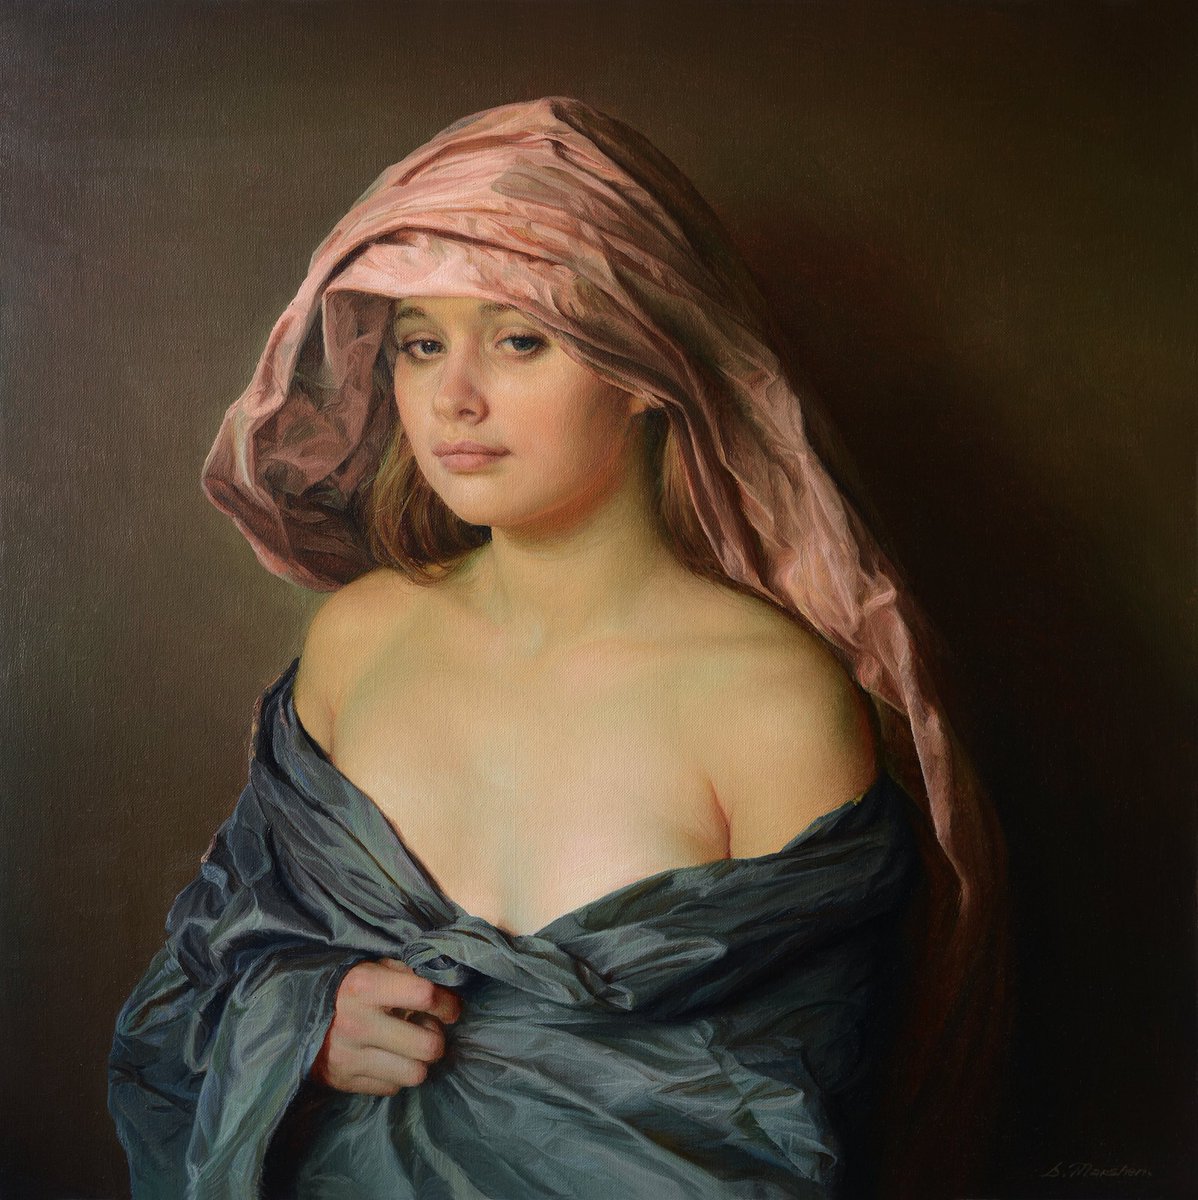 I'm glad to present this work at the 3rd Annual Hartley Invitational
Exhibition, The Salmagundi Club, New York, April 29 - May 31. 
'Sheba', 2024 (oil on linen, 20x20')